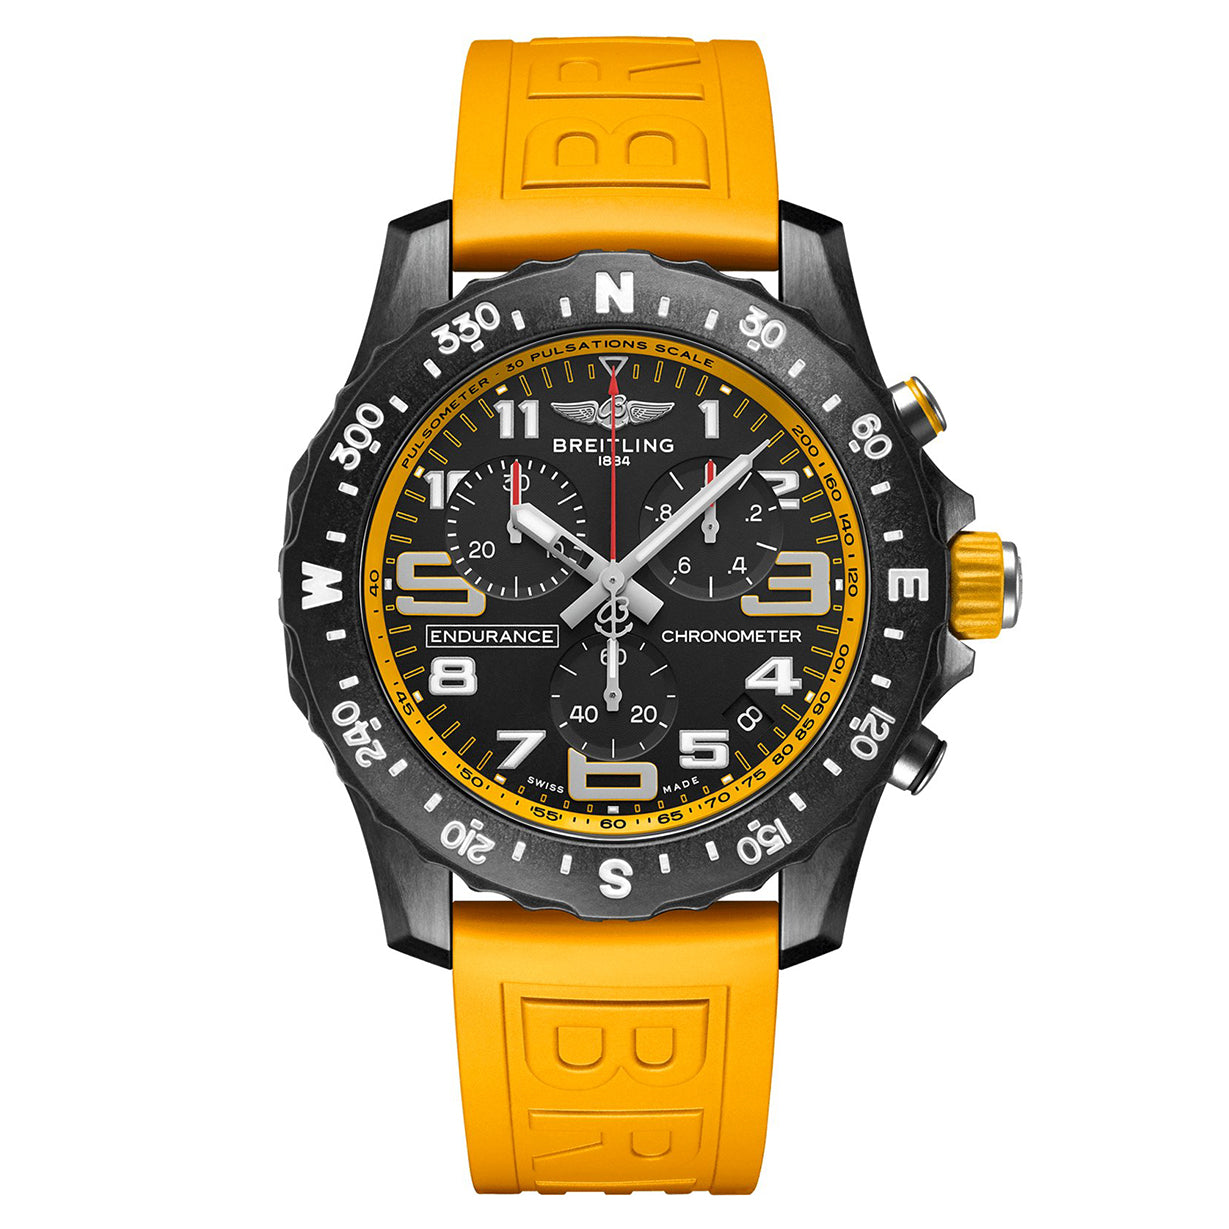 Breitling Endurance Pro X82310A51B1S1 | Ref. X82310A51B1S1 Watches on  Chrono24